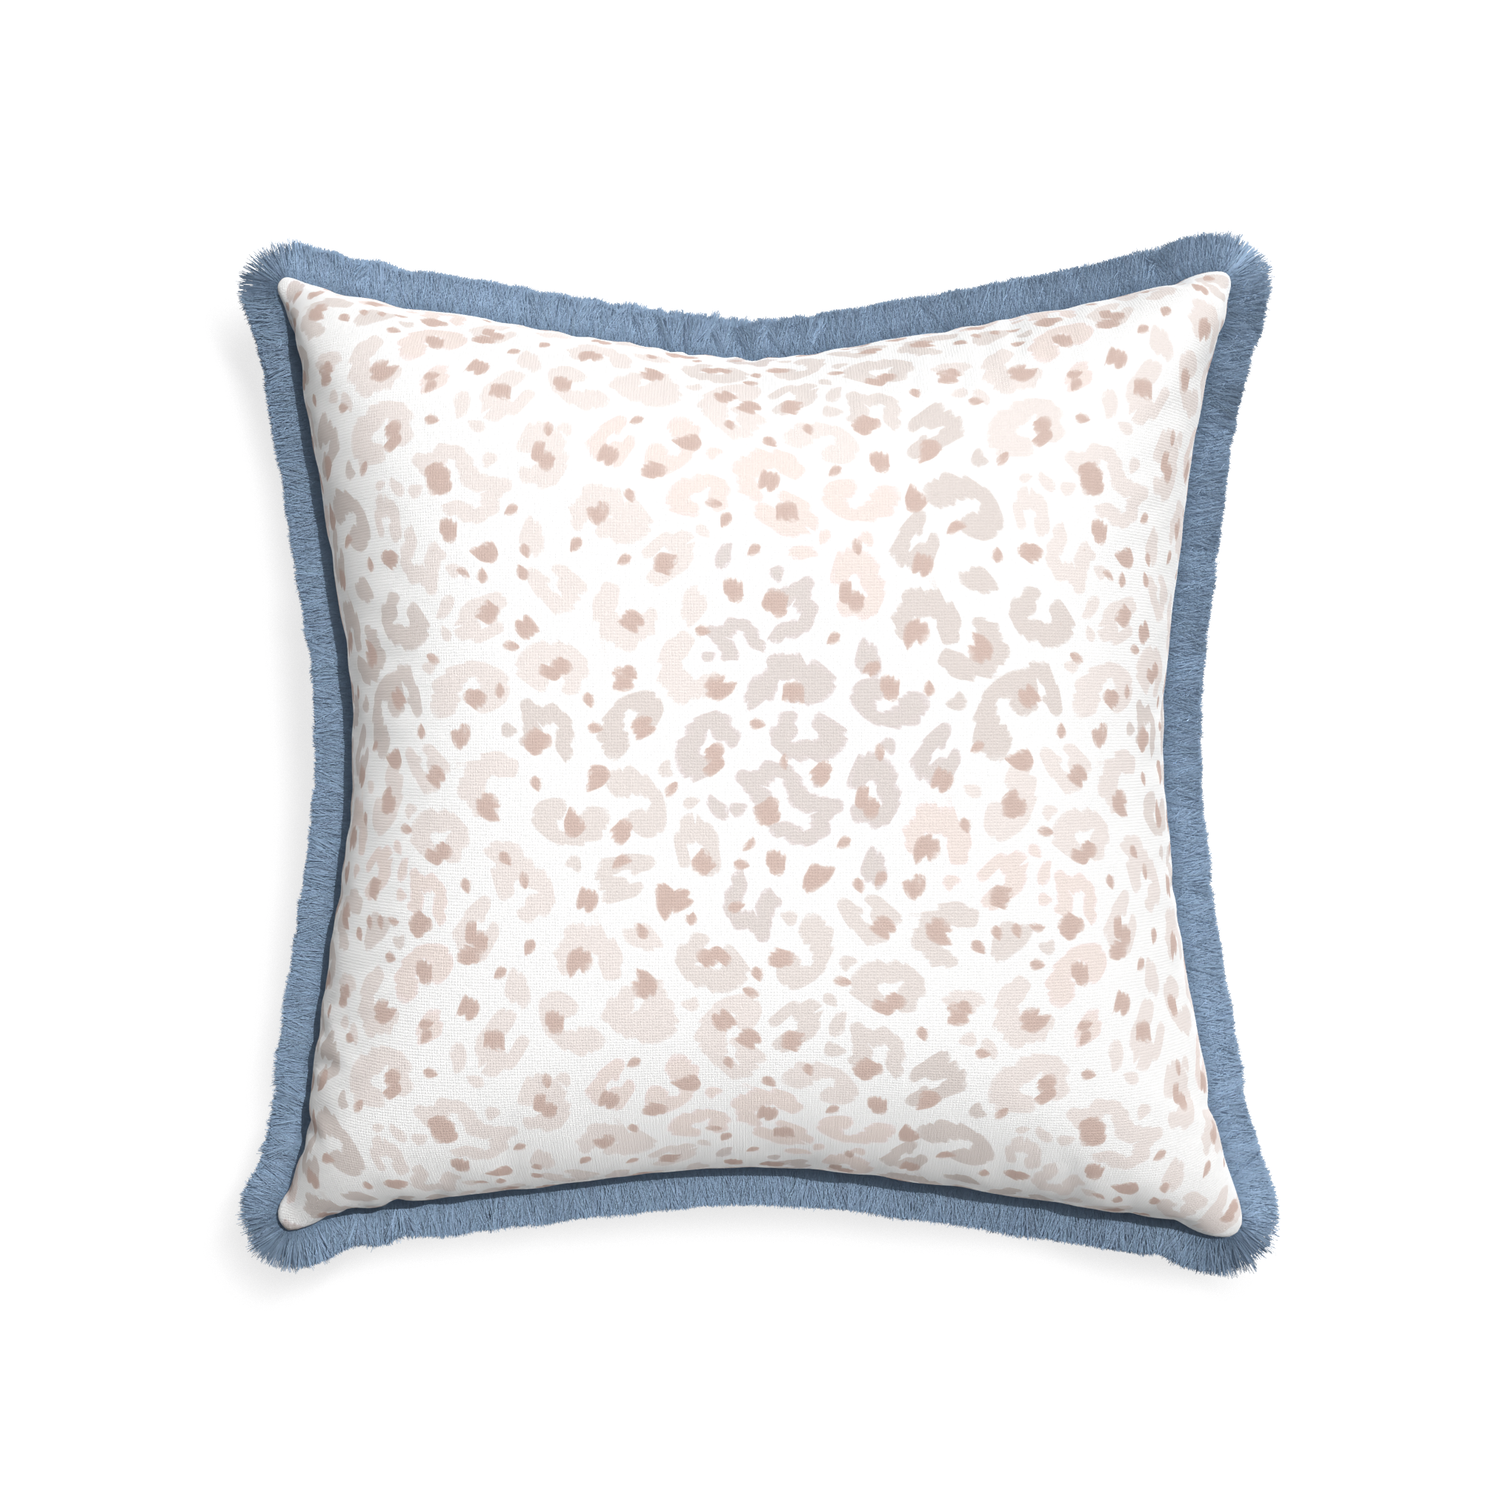 22-square rosie custom pillow with sky fringe on white background